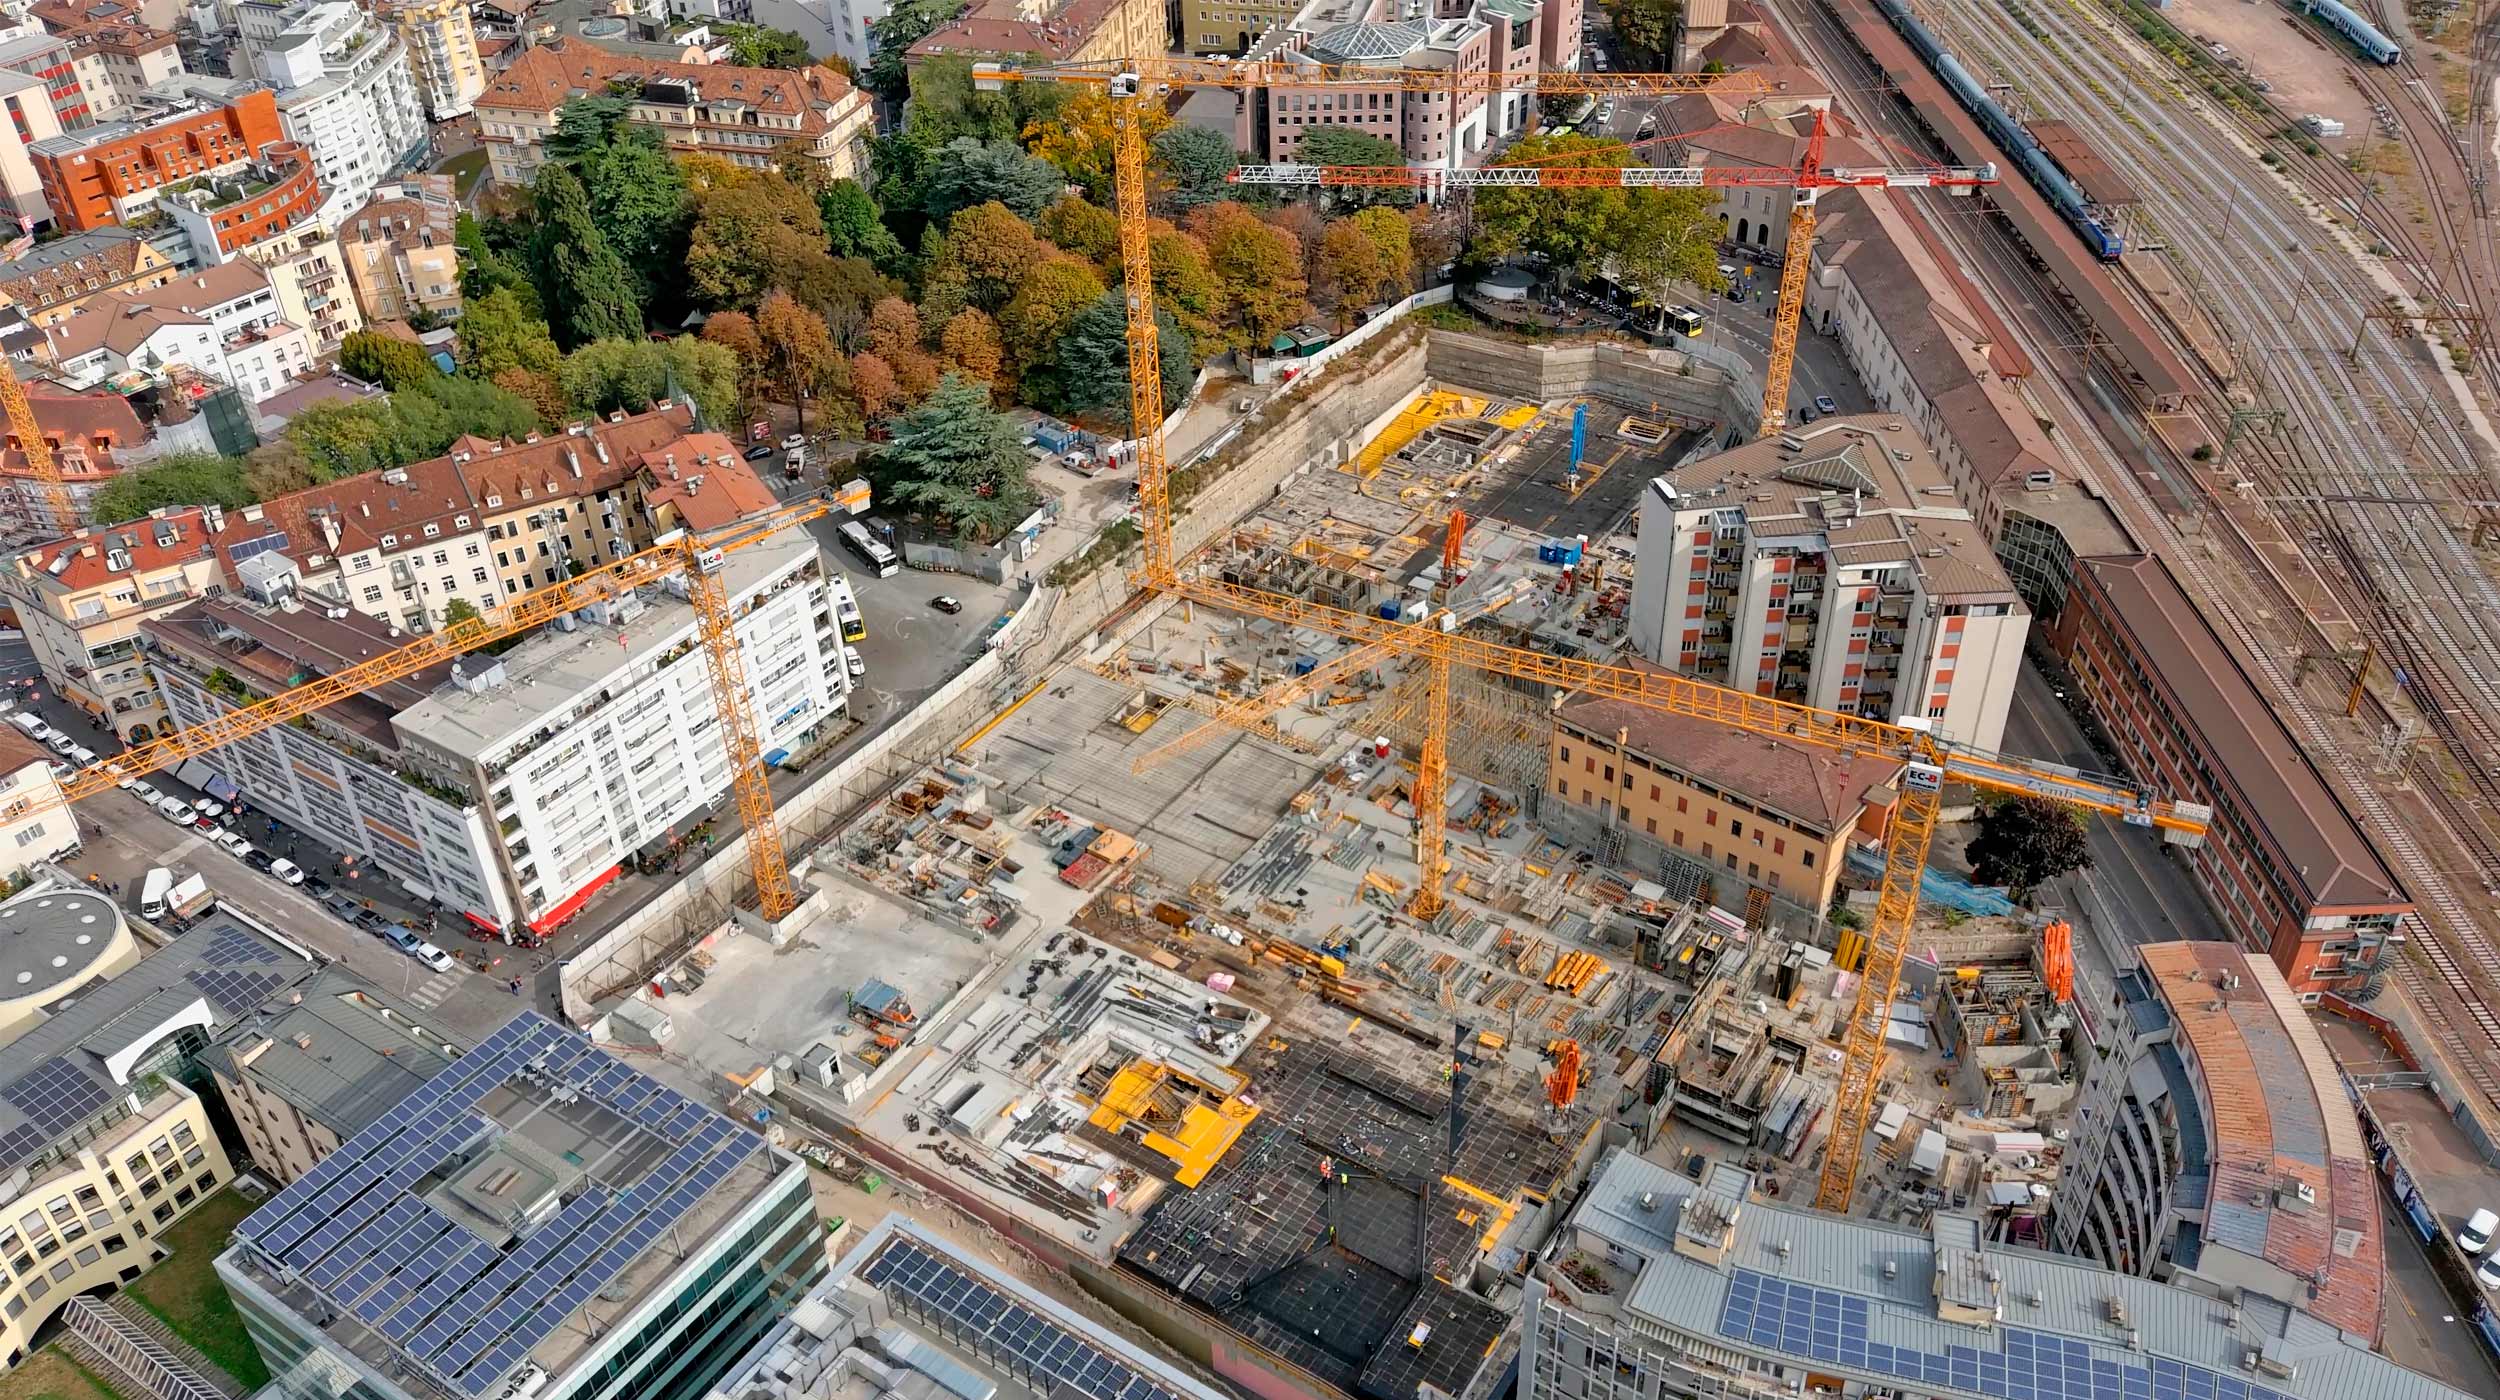 WaltherPark is an urban requalification project in Bolzano, Italy, for the restructuring and enhancement of a central district located just next to the railway station and Piazza Walther, the city's main square near Bolzano Cathedral.